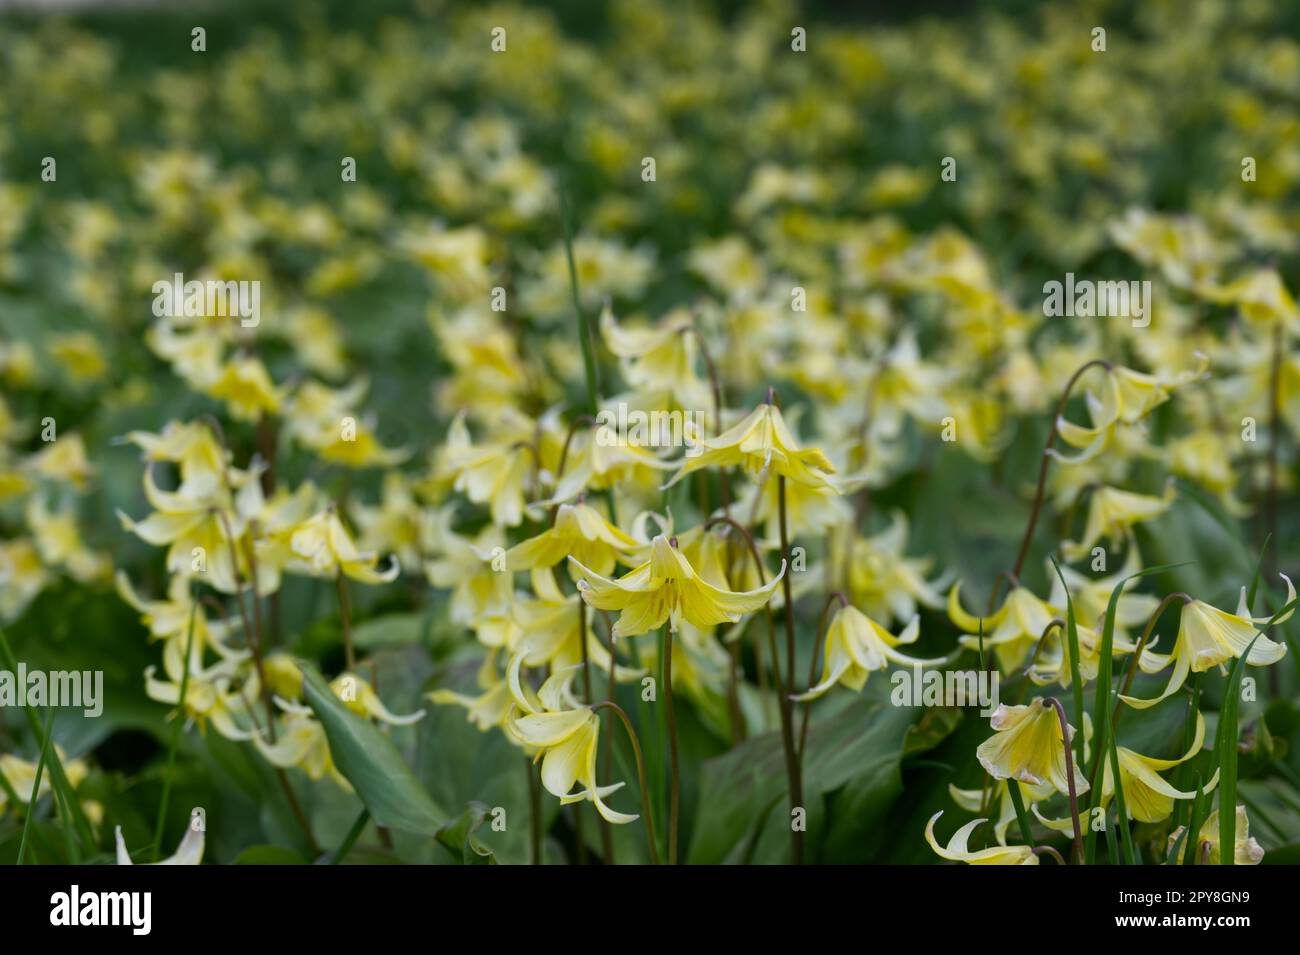 Spring flowers of Erythronium 'Pagoda', yellow Dog's tooth violet in UK garden April Stock Photo